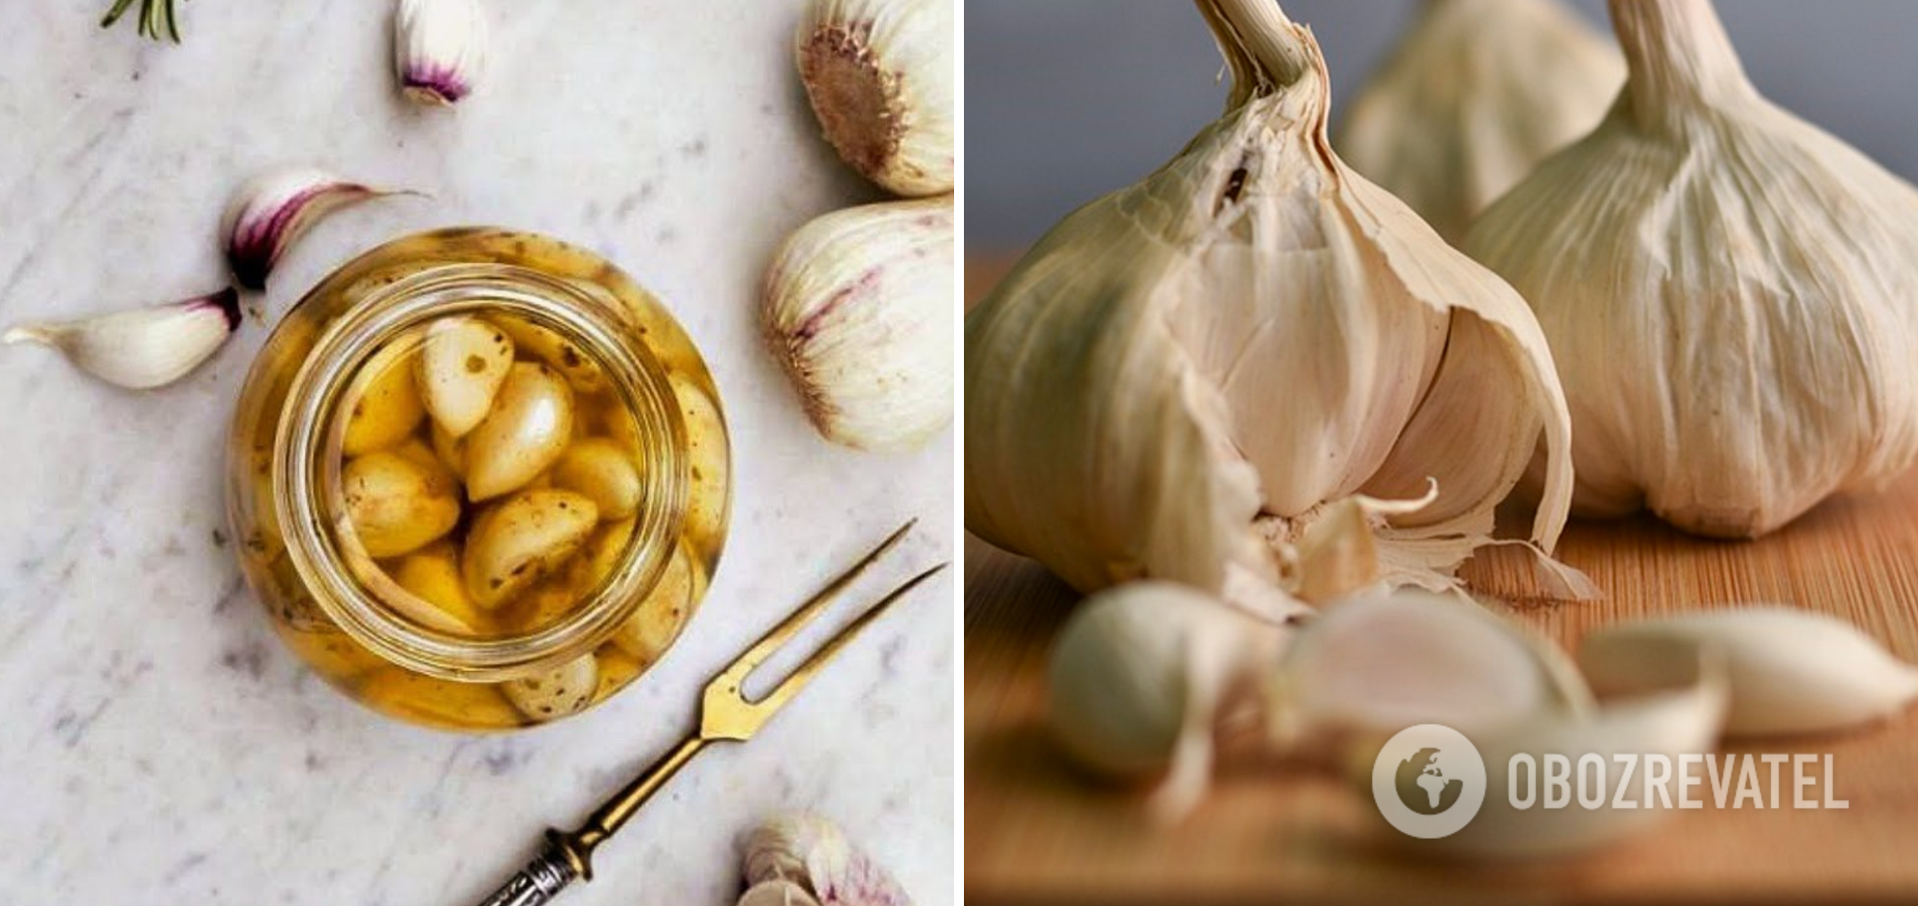 How to store garlic in oil in a jar